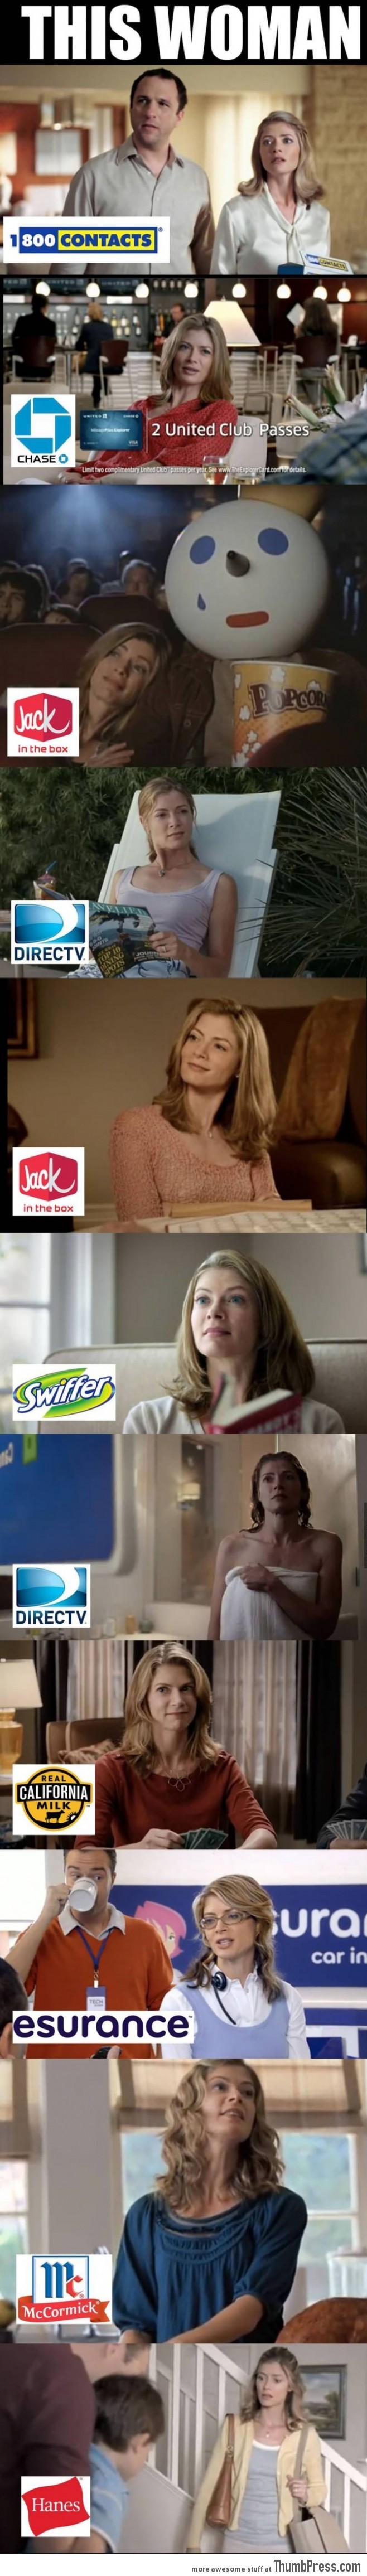 Do you notice this woman in the commercials